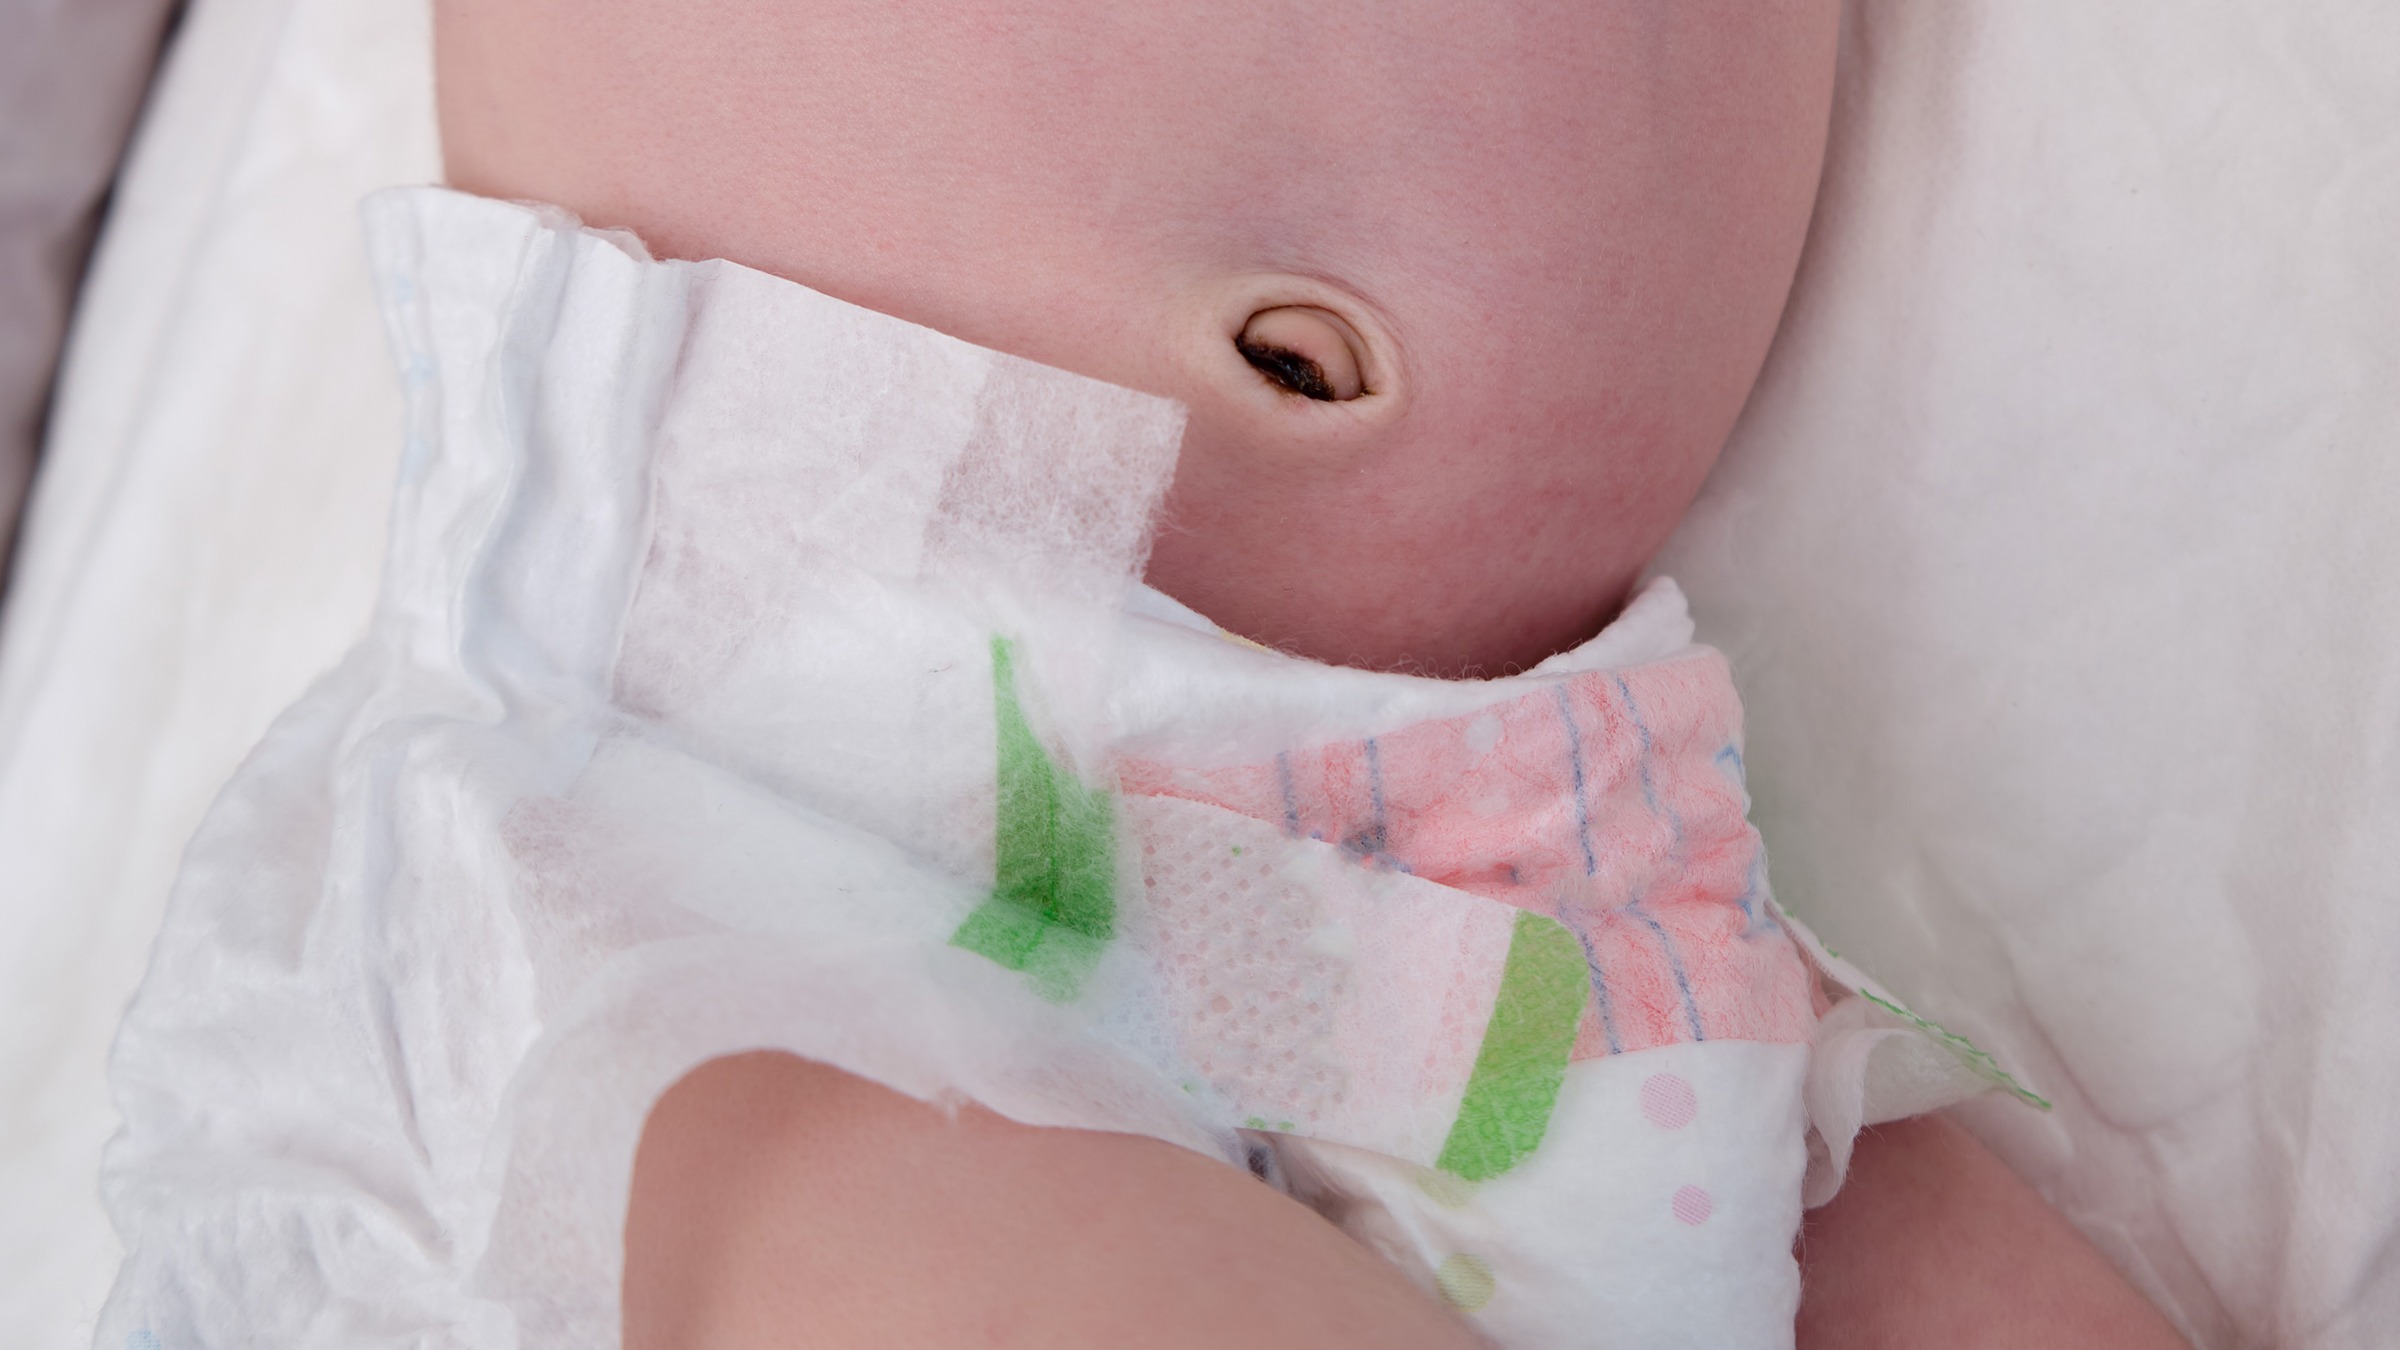 How Do You Take Care of a Newborn's Belly Button? - GoodRx